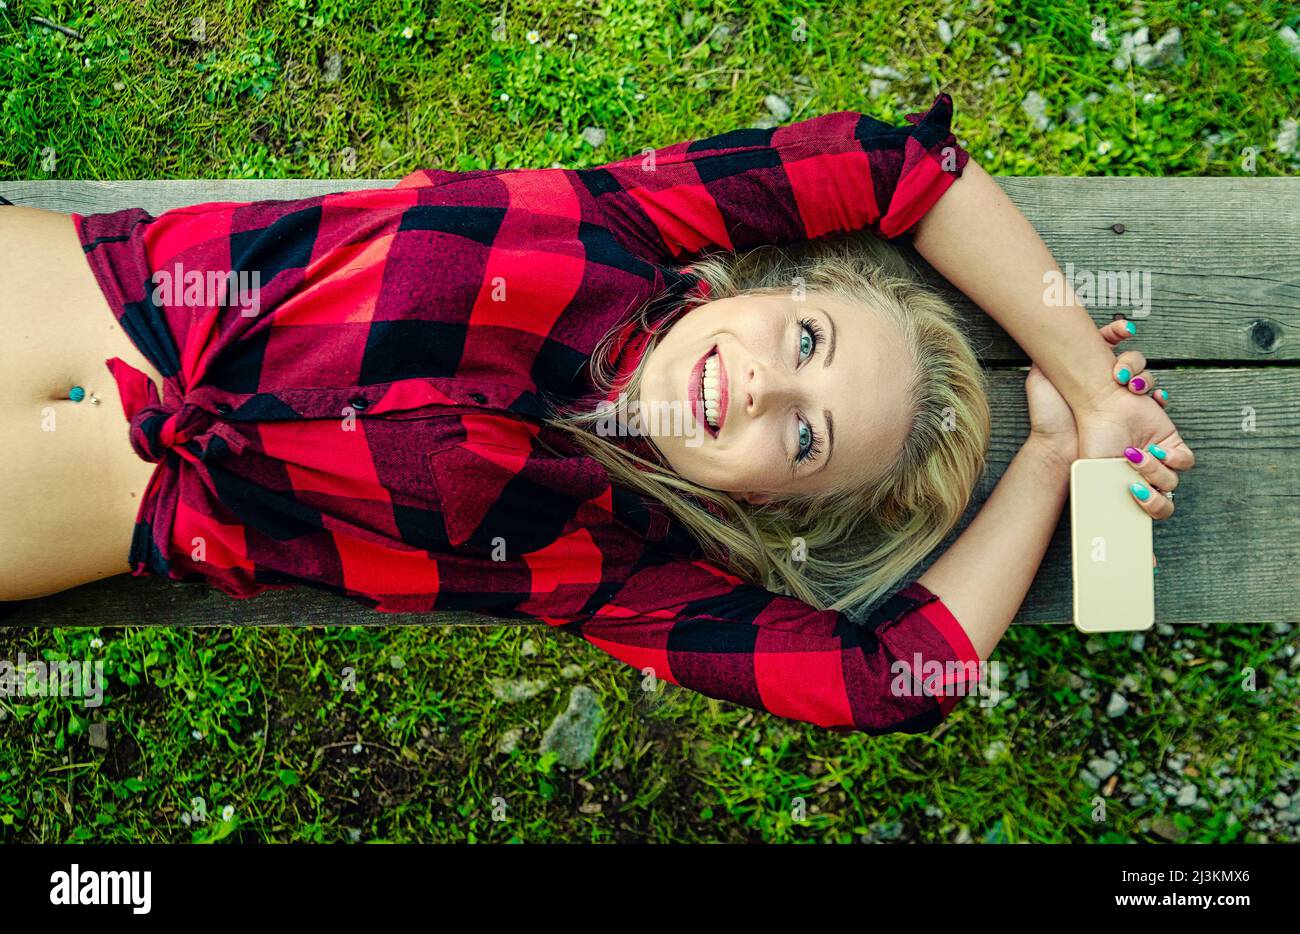 Happy pretty young blond woman daydreaming with blissful smile and beatific expression as she lies back on a wooden bench over grass Stock Photo